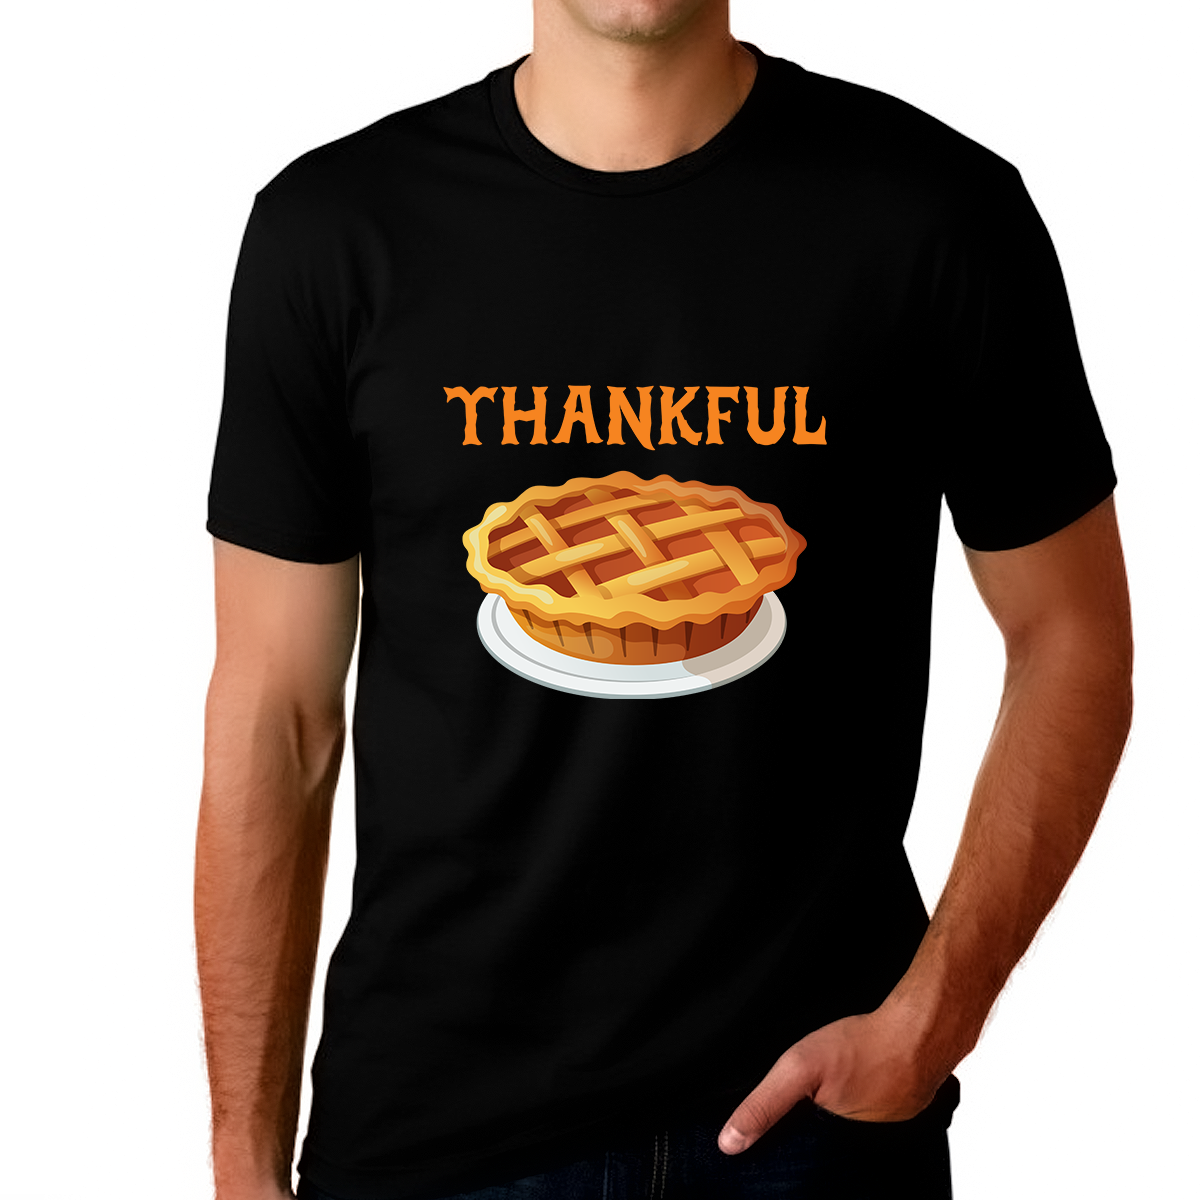 Funny Thanksgiving Graphic Tees for Men Thanksgiving Gifts Fall Shirts for Men Fall Pie Thanksgiving Shirt